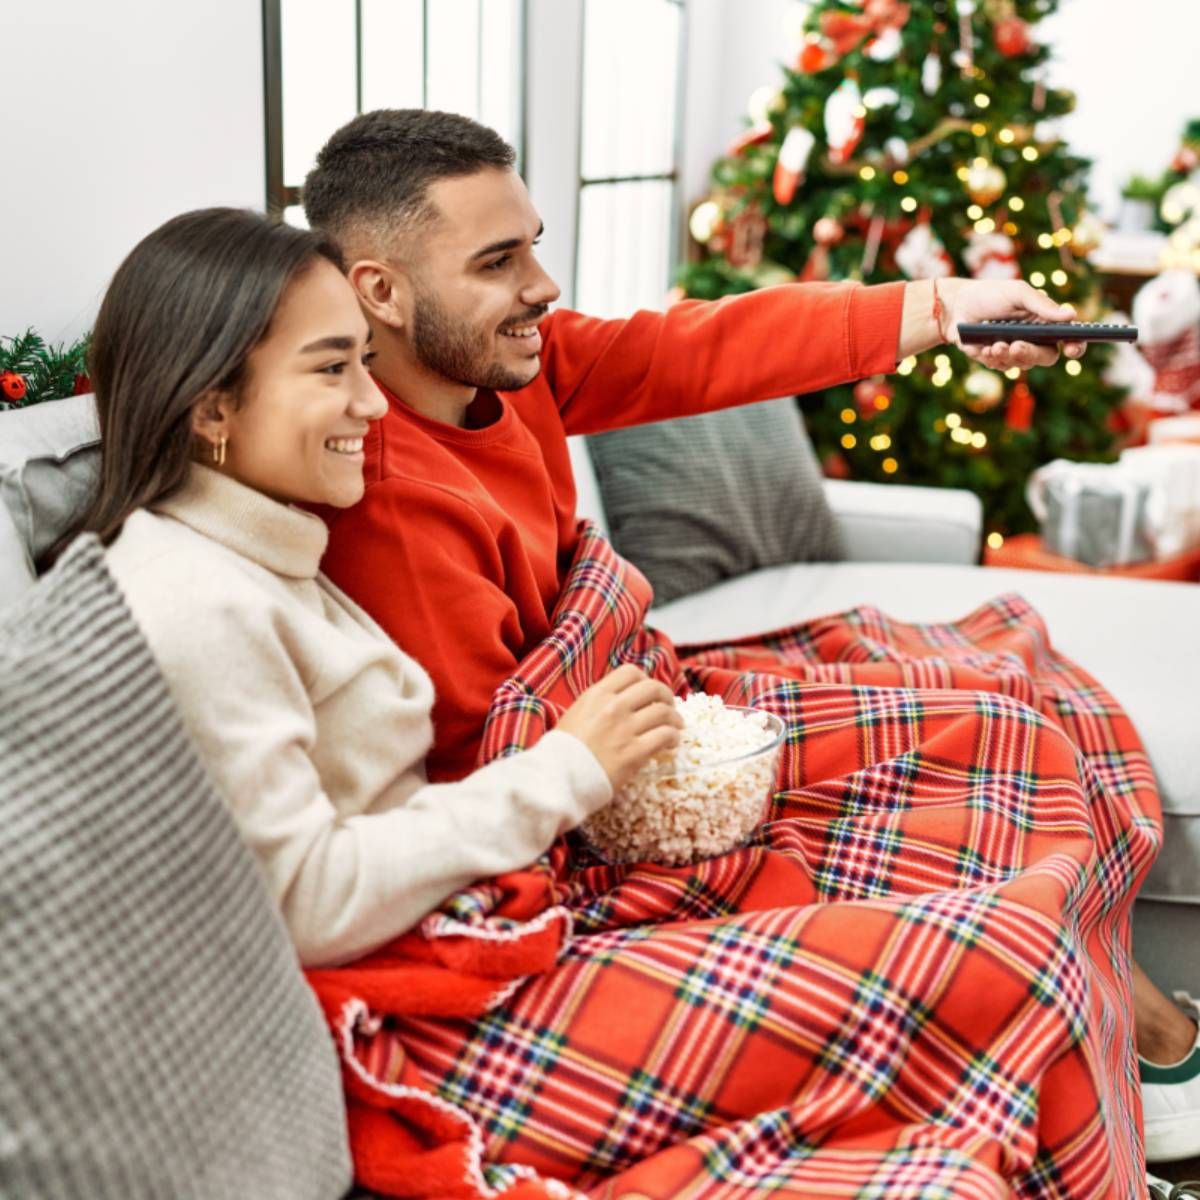 Young couple is sitting on the couch by their Christmas tree while the man is turning on the TV.